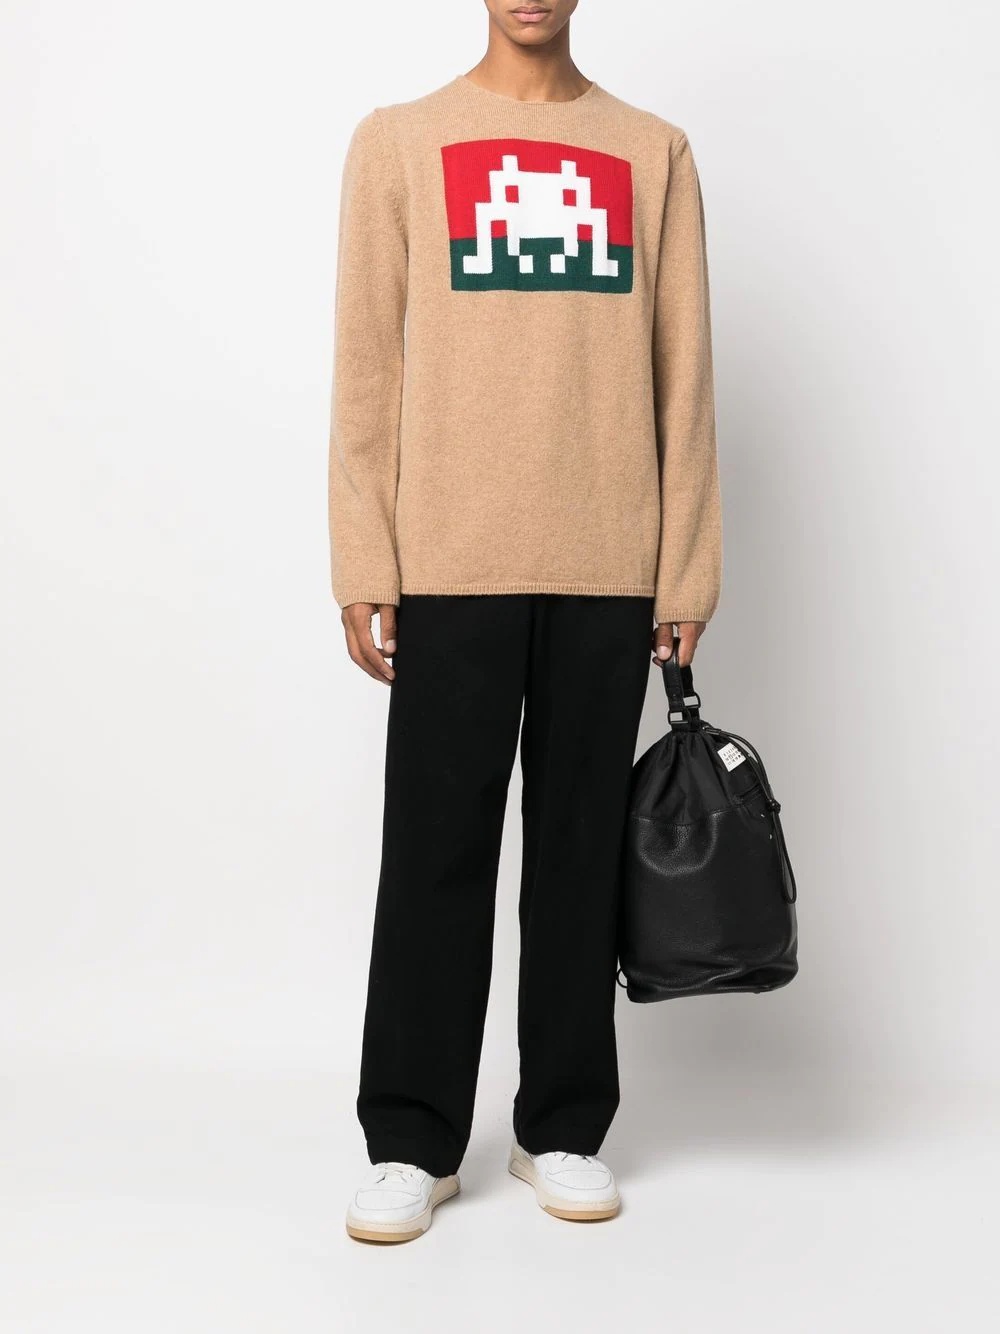 Space Invaders graphic-knit jumper - 2